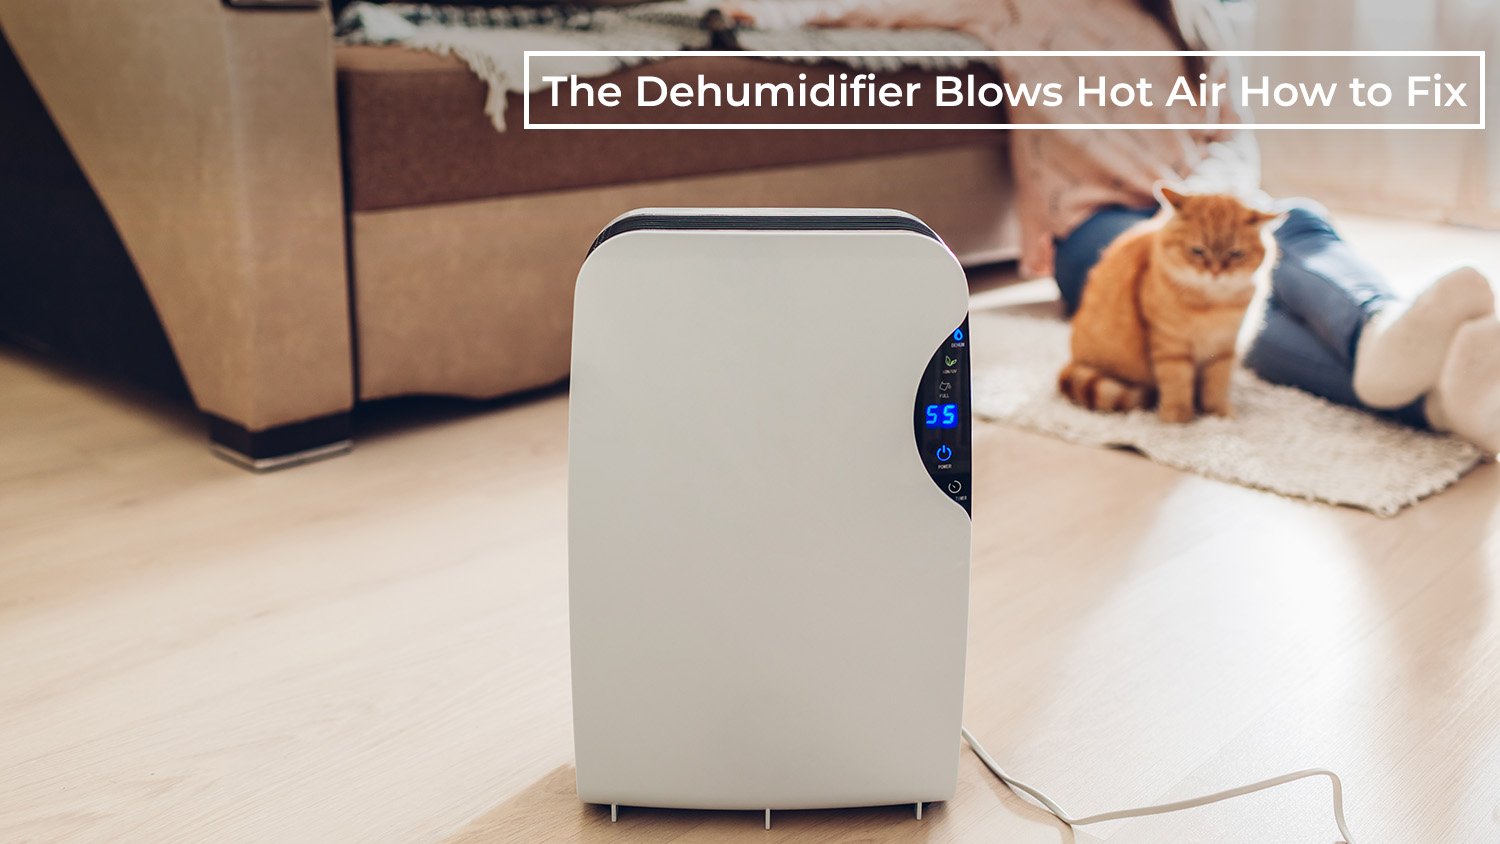 The Dehumidifier Blows Hot Air: How to Fix the Overheating Issue